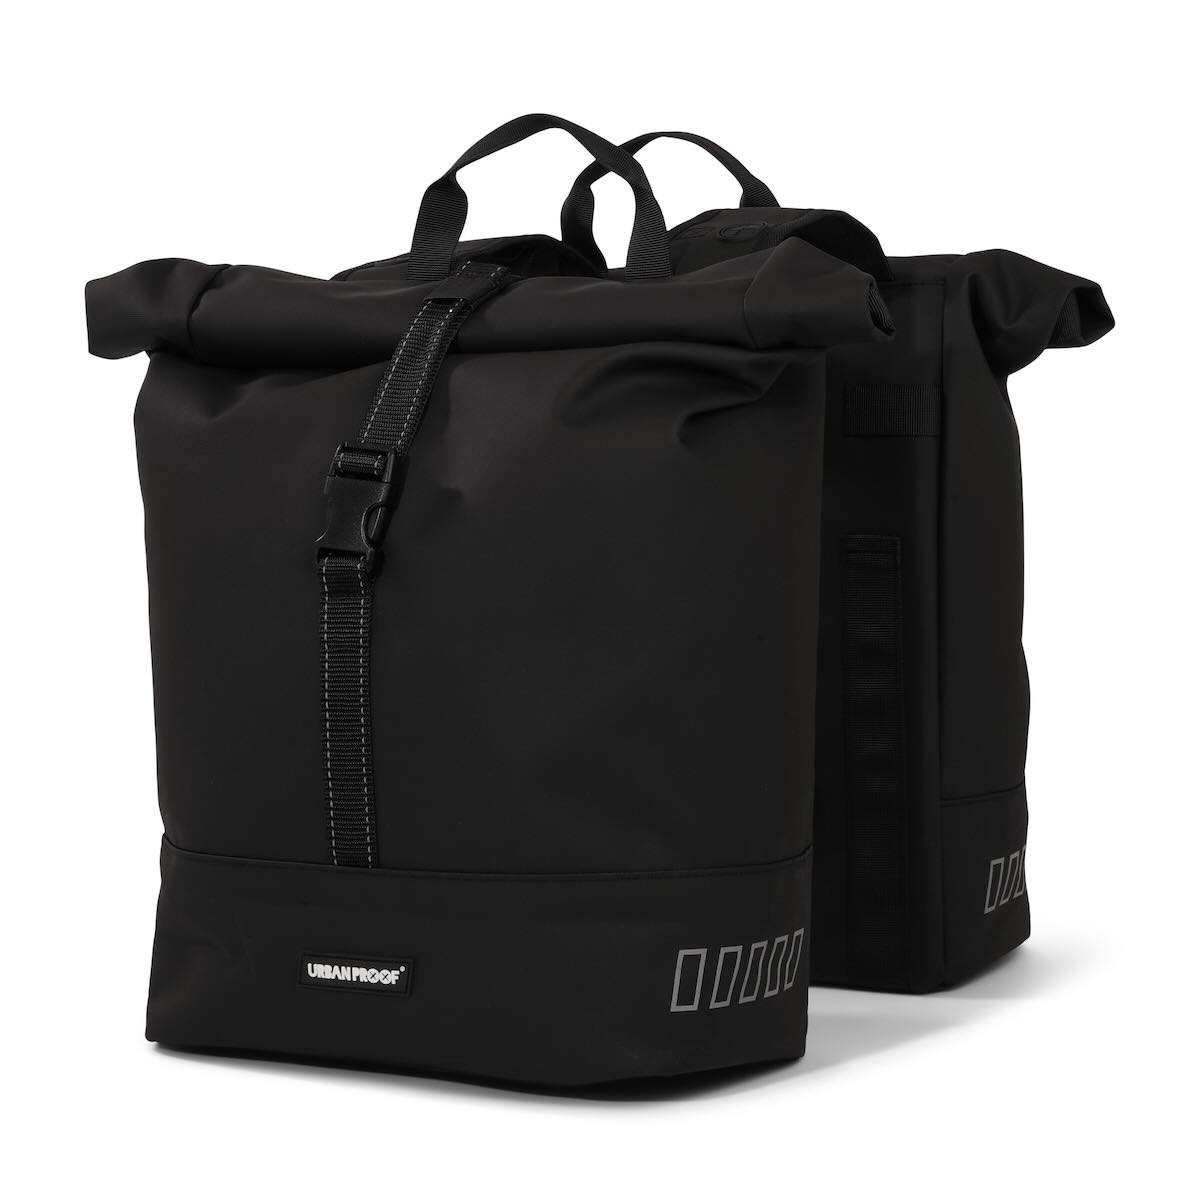 Urban Proof Double Rolltop Bag 38L Recycled